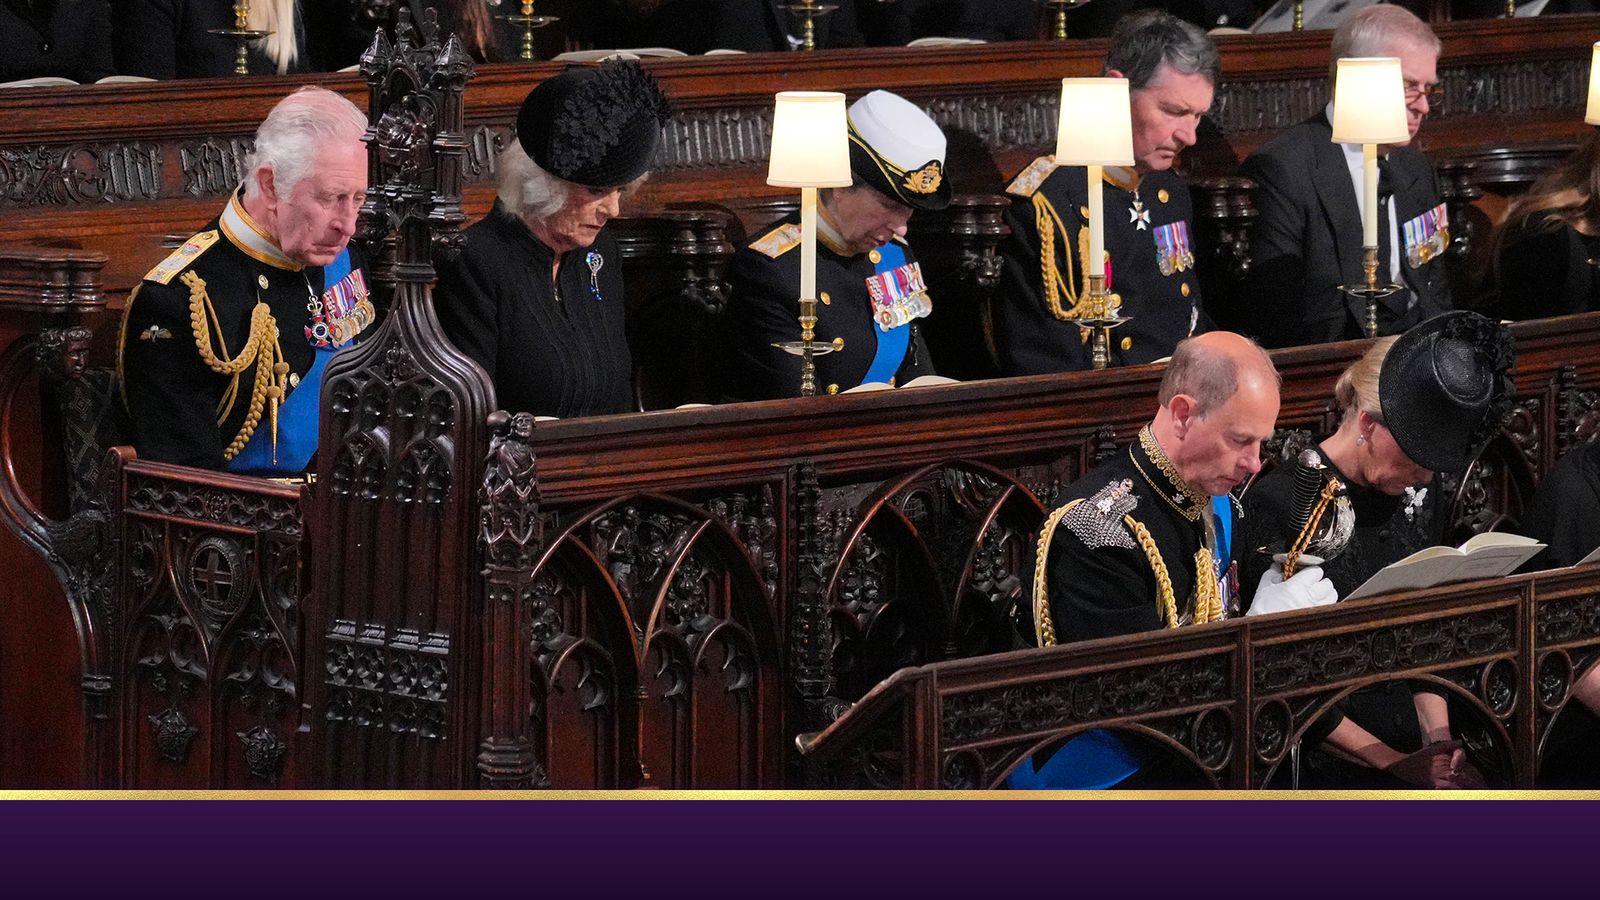 The monarch’s seat: King Charles III take his place in St George’s Chapel in Windsor | UK News